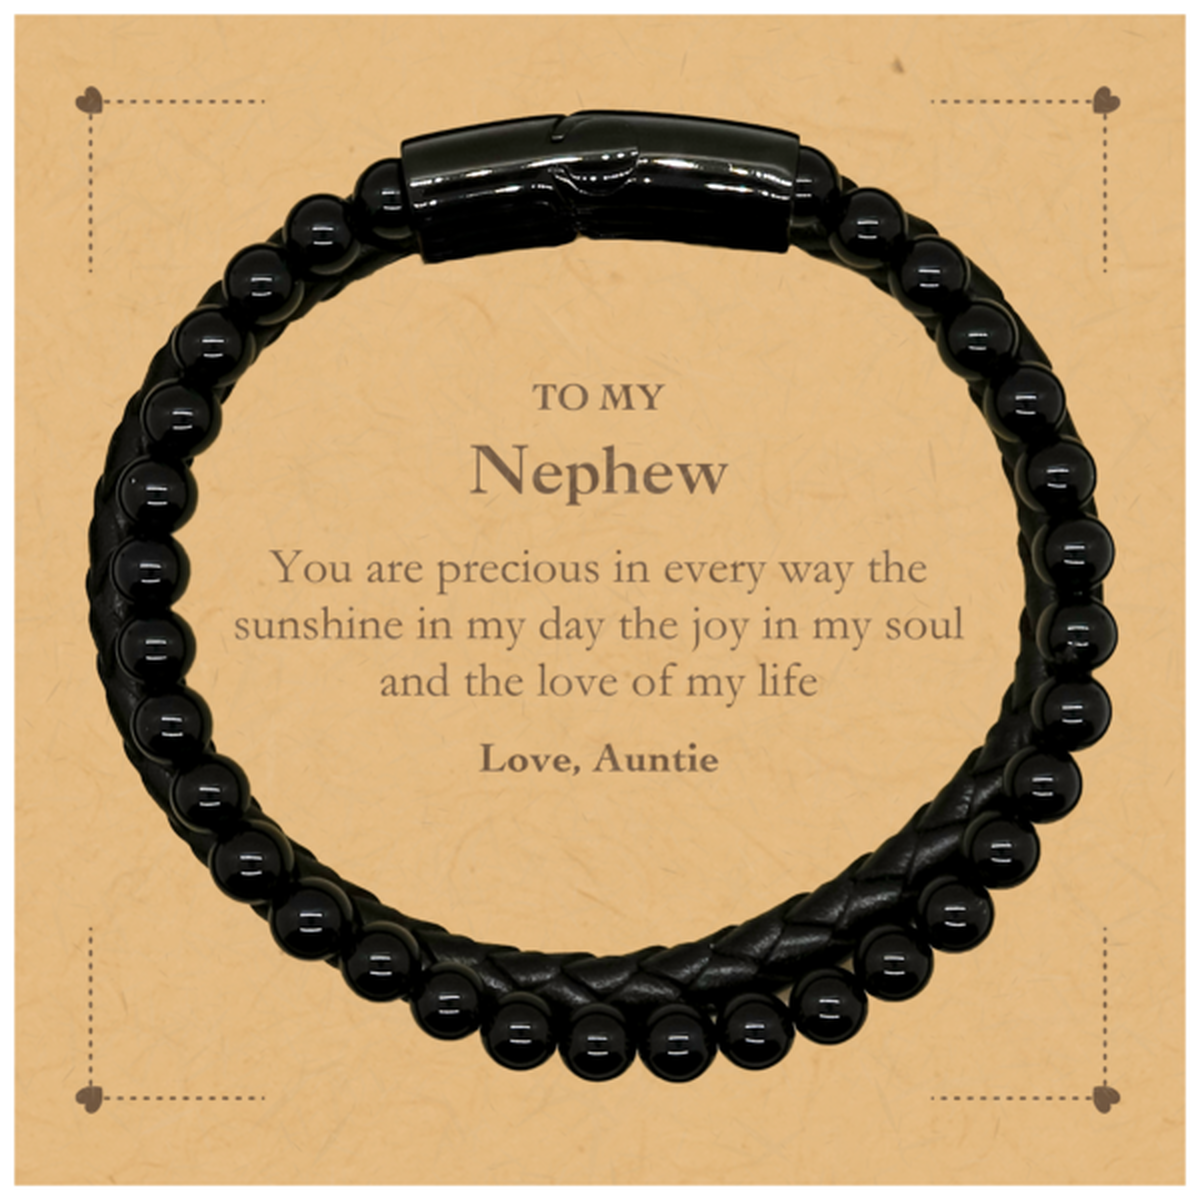 Graduation Gifts for Nephew Stone Leather Bracelets Present from Auntie, Christmas Nephew Birthday Gifts Nephew You are precious in every way the sunshine in my day. Love, Auntie